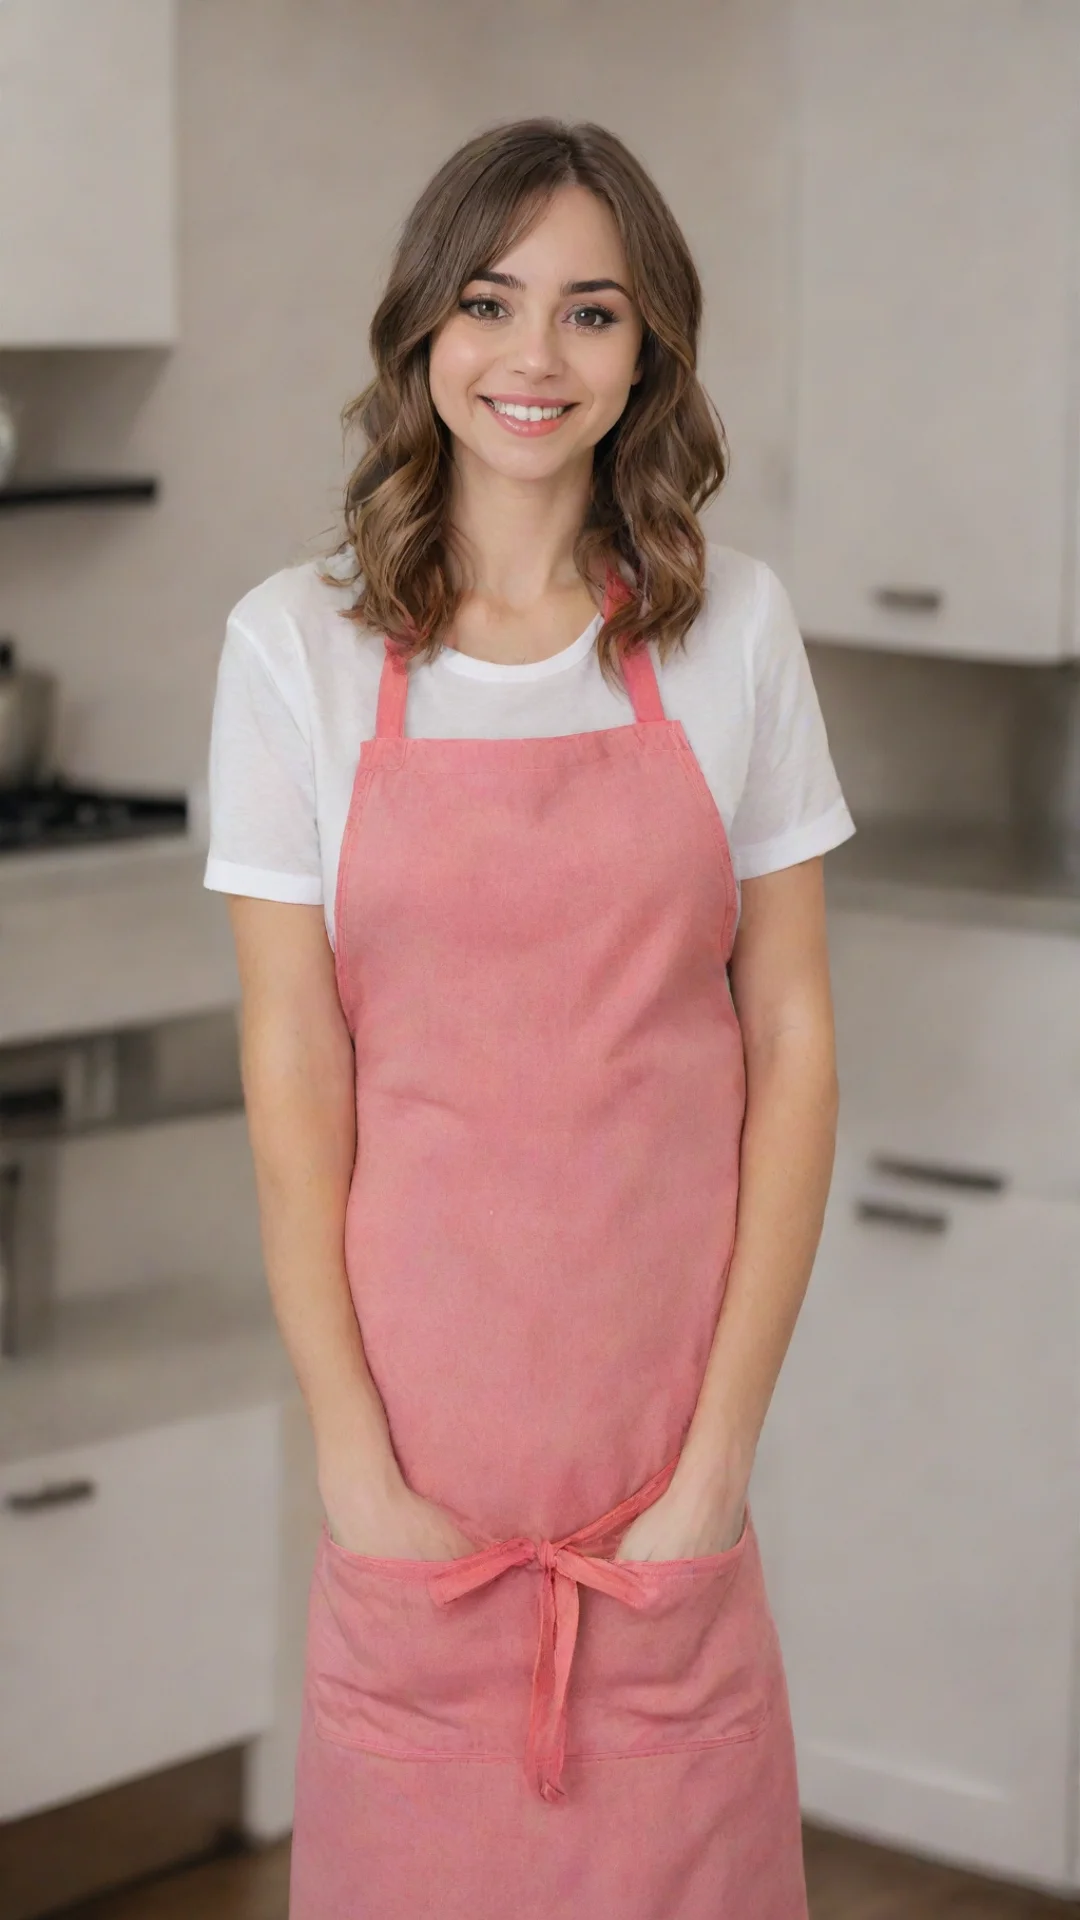 aiartstation art riley reid in apron smiling  confident engaging wow 3 tall